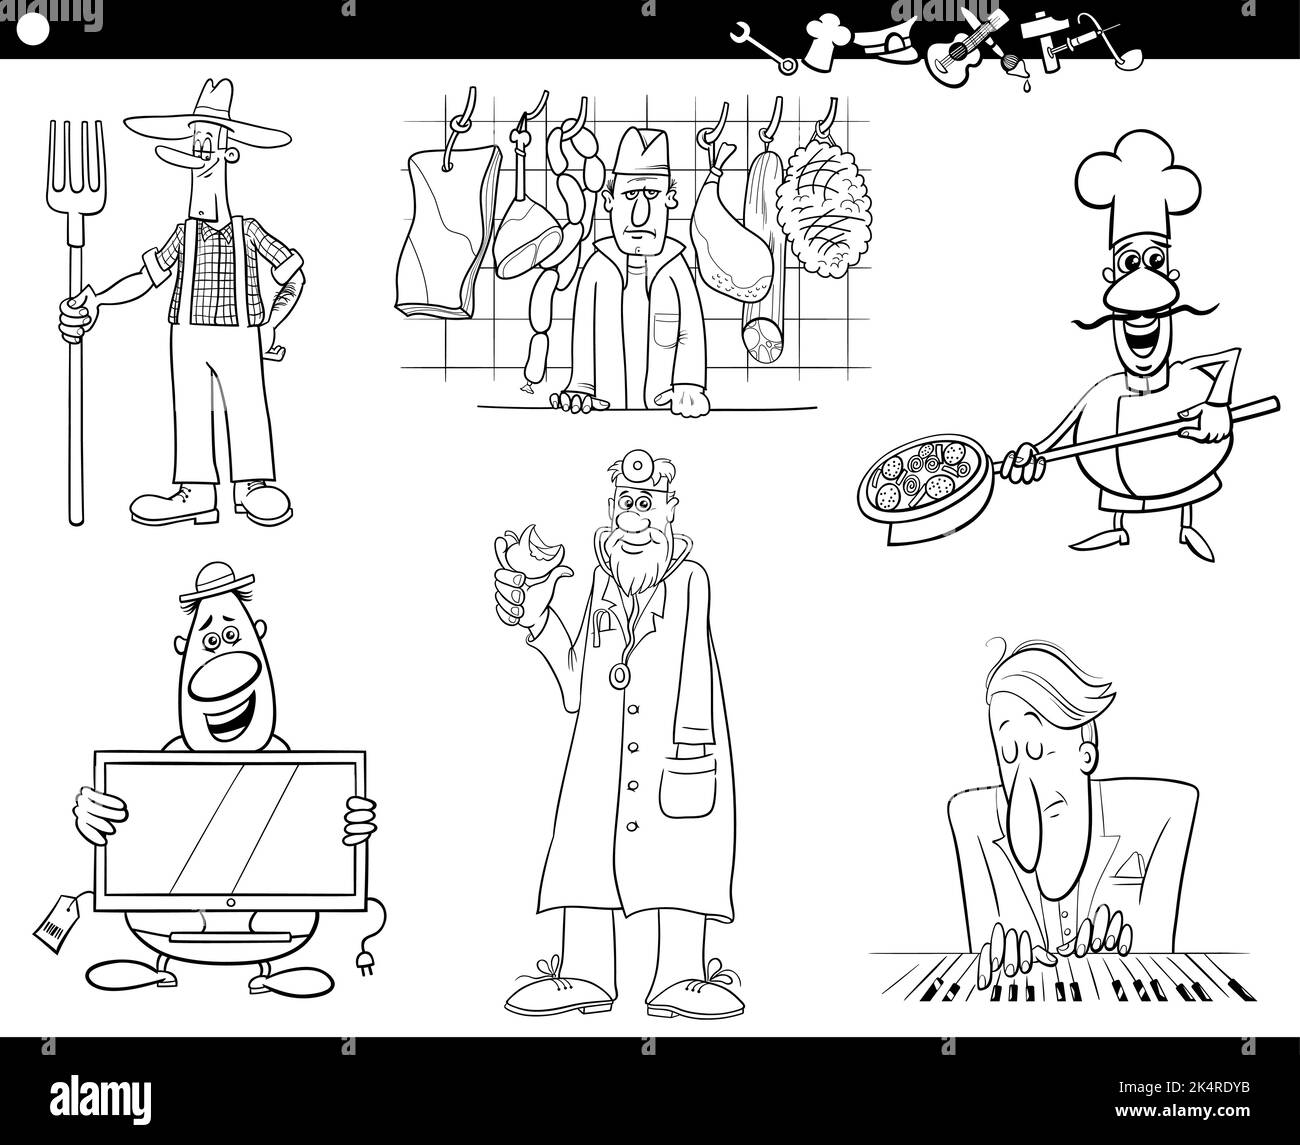 Black and white cartoon illustration of professional people occupations comic characters set coloring page Stock Vector